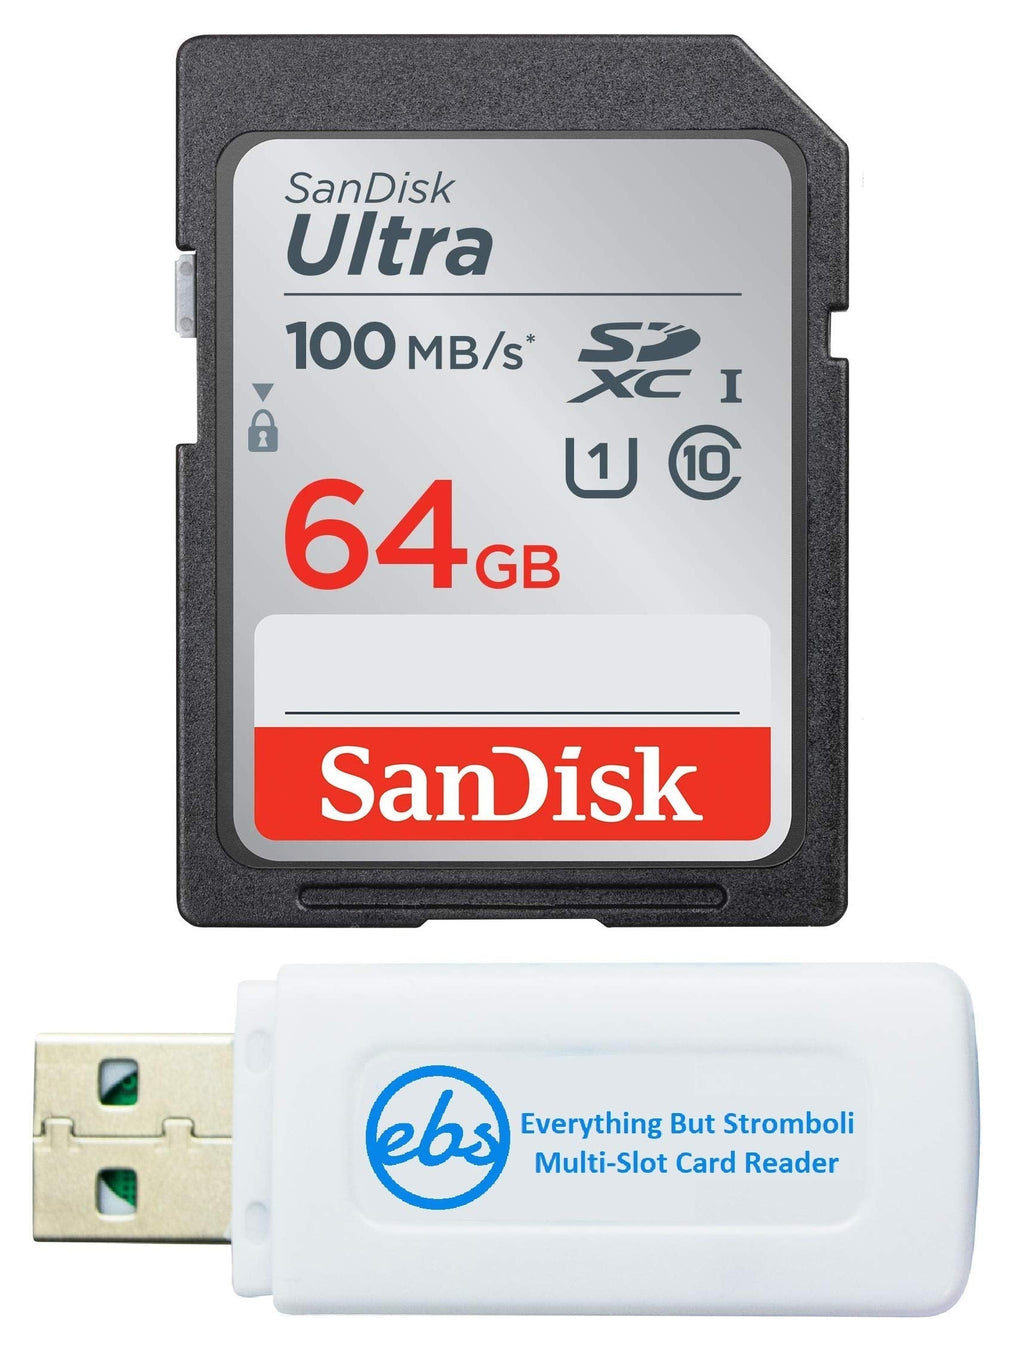 Canon EOS Rebel T5 Memory Card SanDisk SD Ultra SD Memory Card Bundle with Everything But Stromboli Memory Card Reader (64GB)